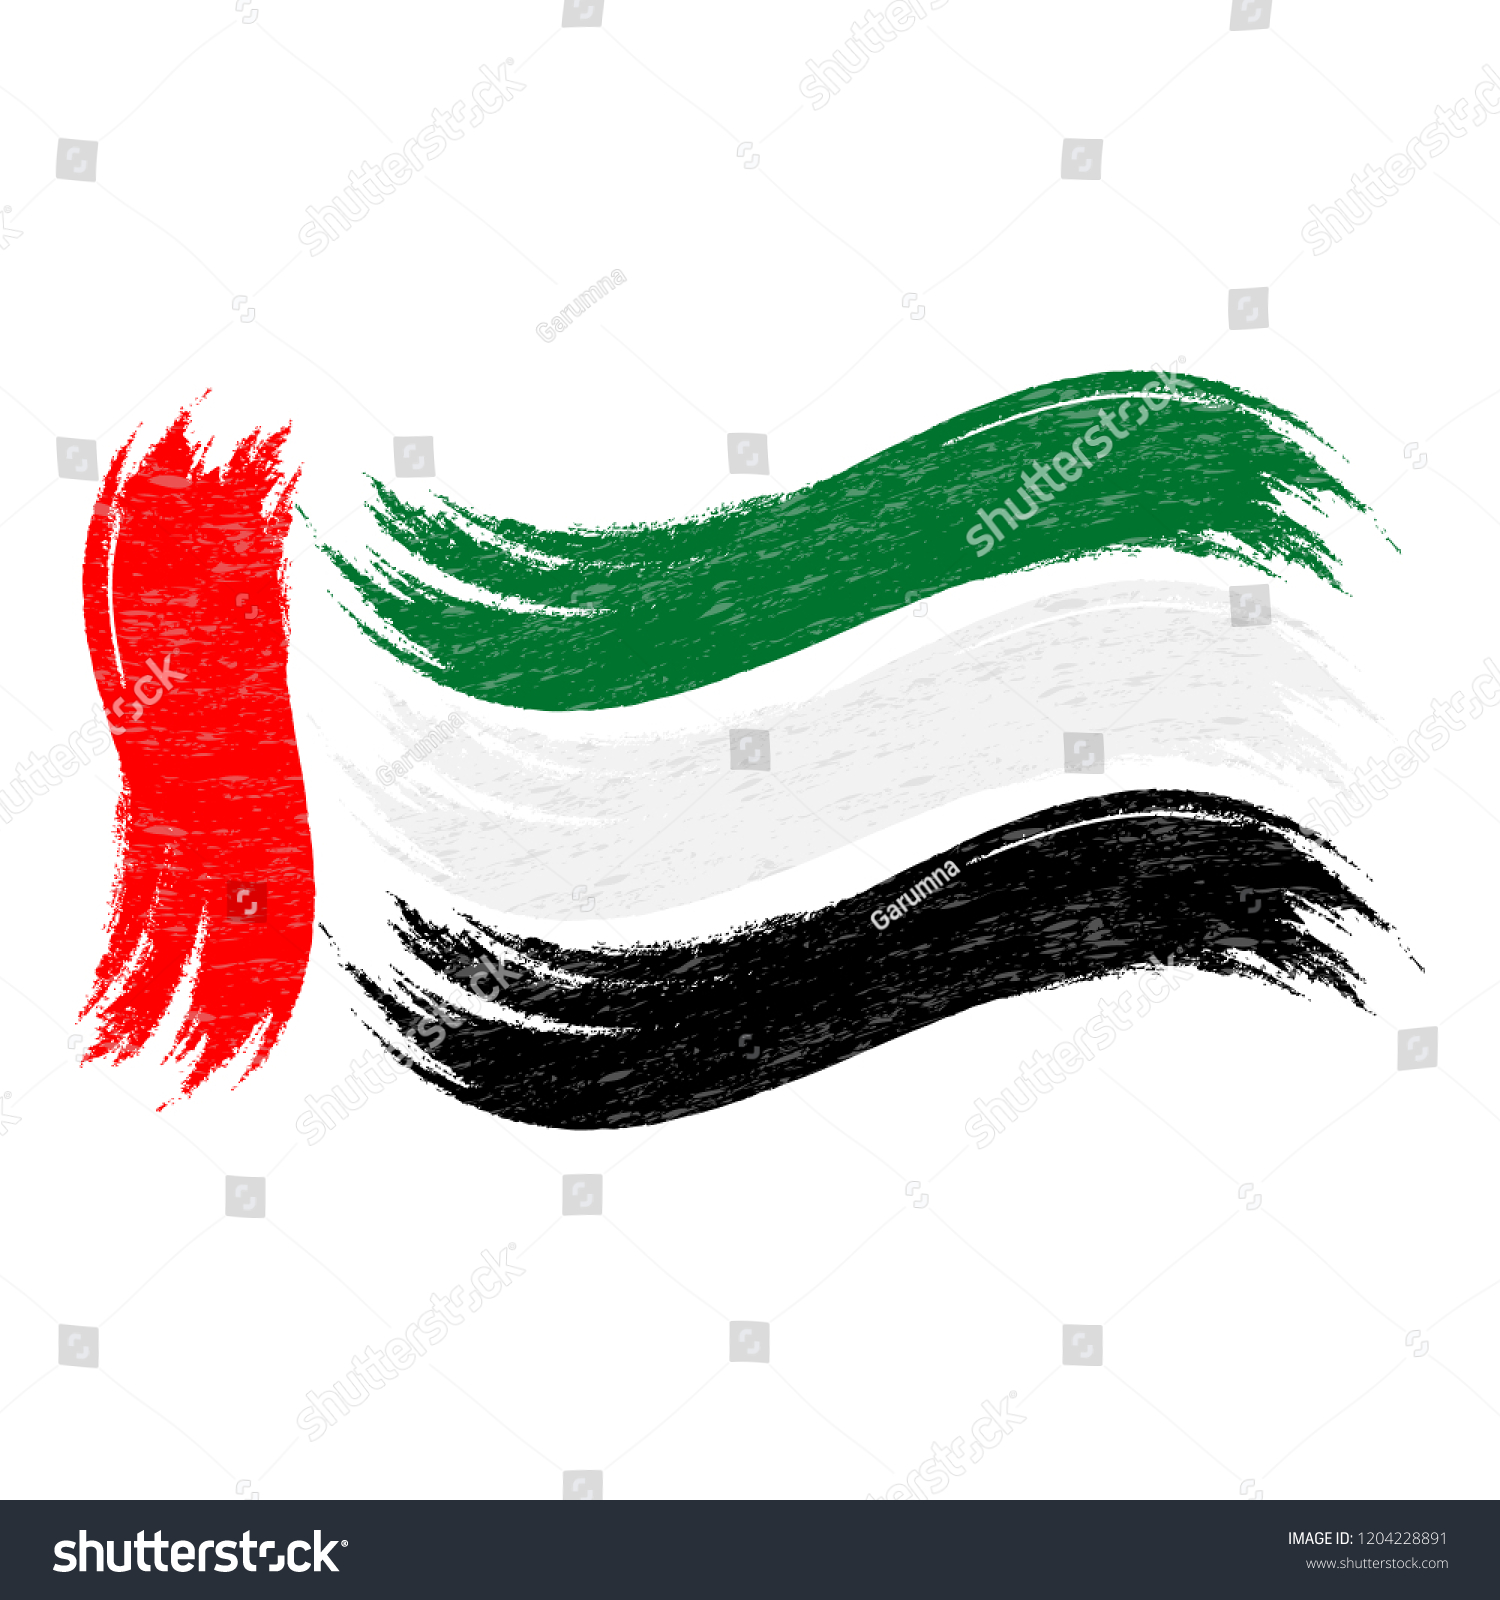 SVG of Grunge Brush Stroke With National Flag Of United Arab Emirates Isolated On A White Background. Vector Illustration. Flag In Grungy Style. Use For Brochures, Printed Materials, Logos, Independence Day svg